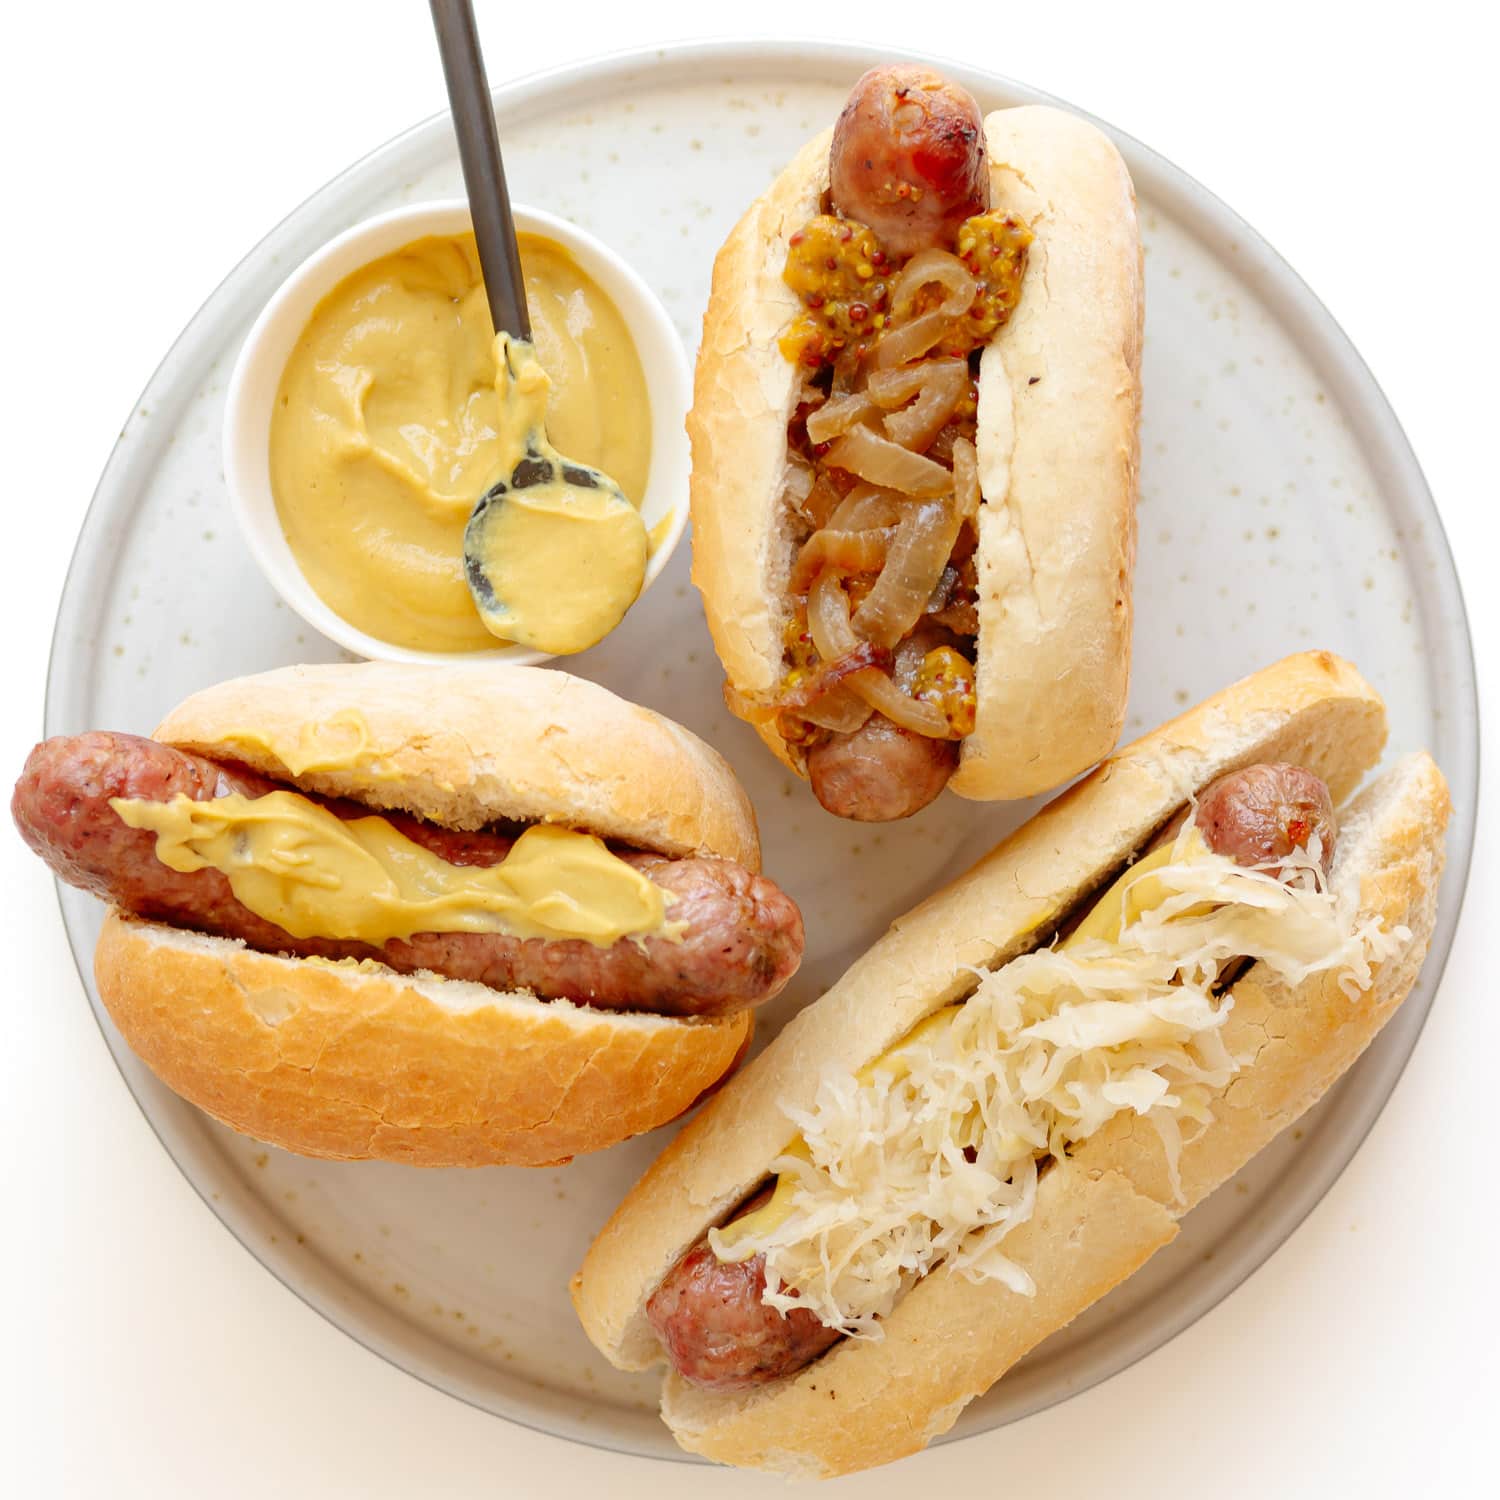 Three grilled bratwurst in buns with different toppings on a plate with a small bowl of German mustard.